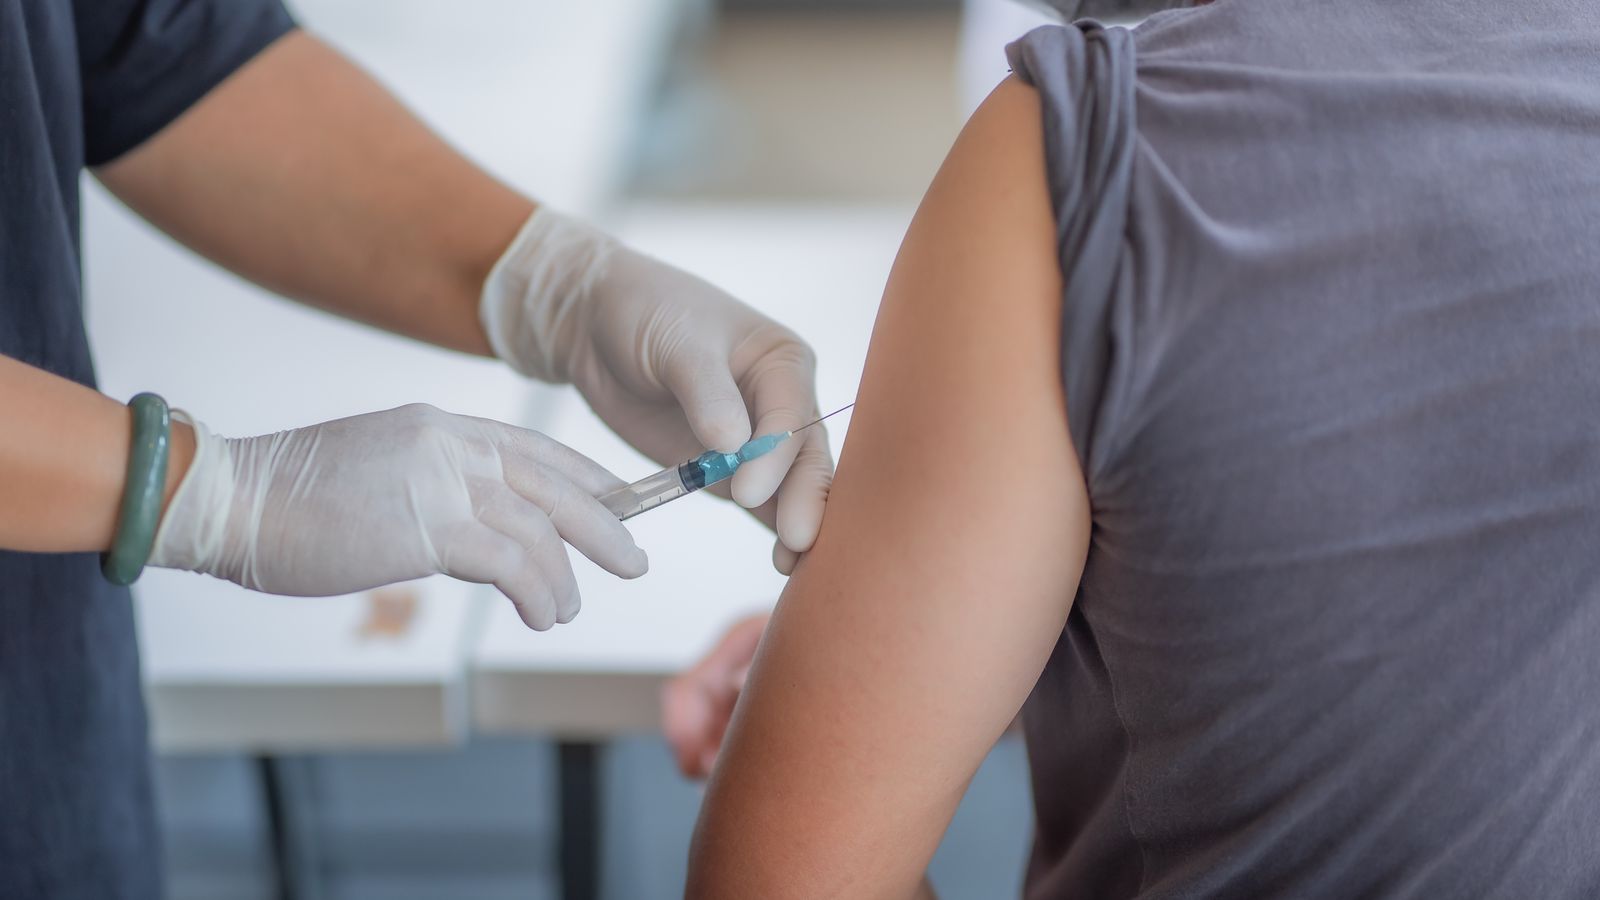 The rules over who can administer a vaccine have been changed to include more categories